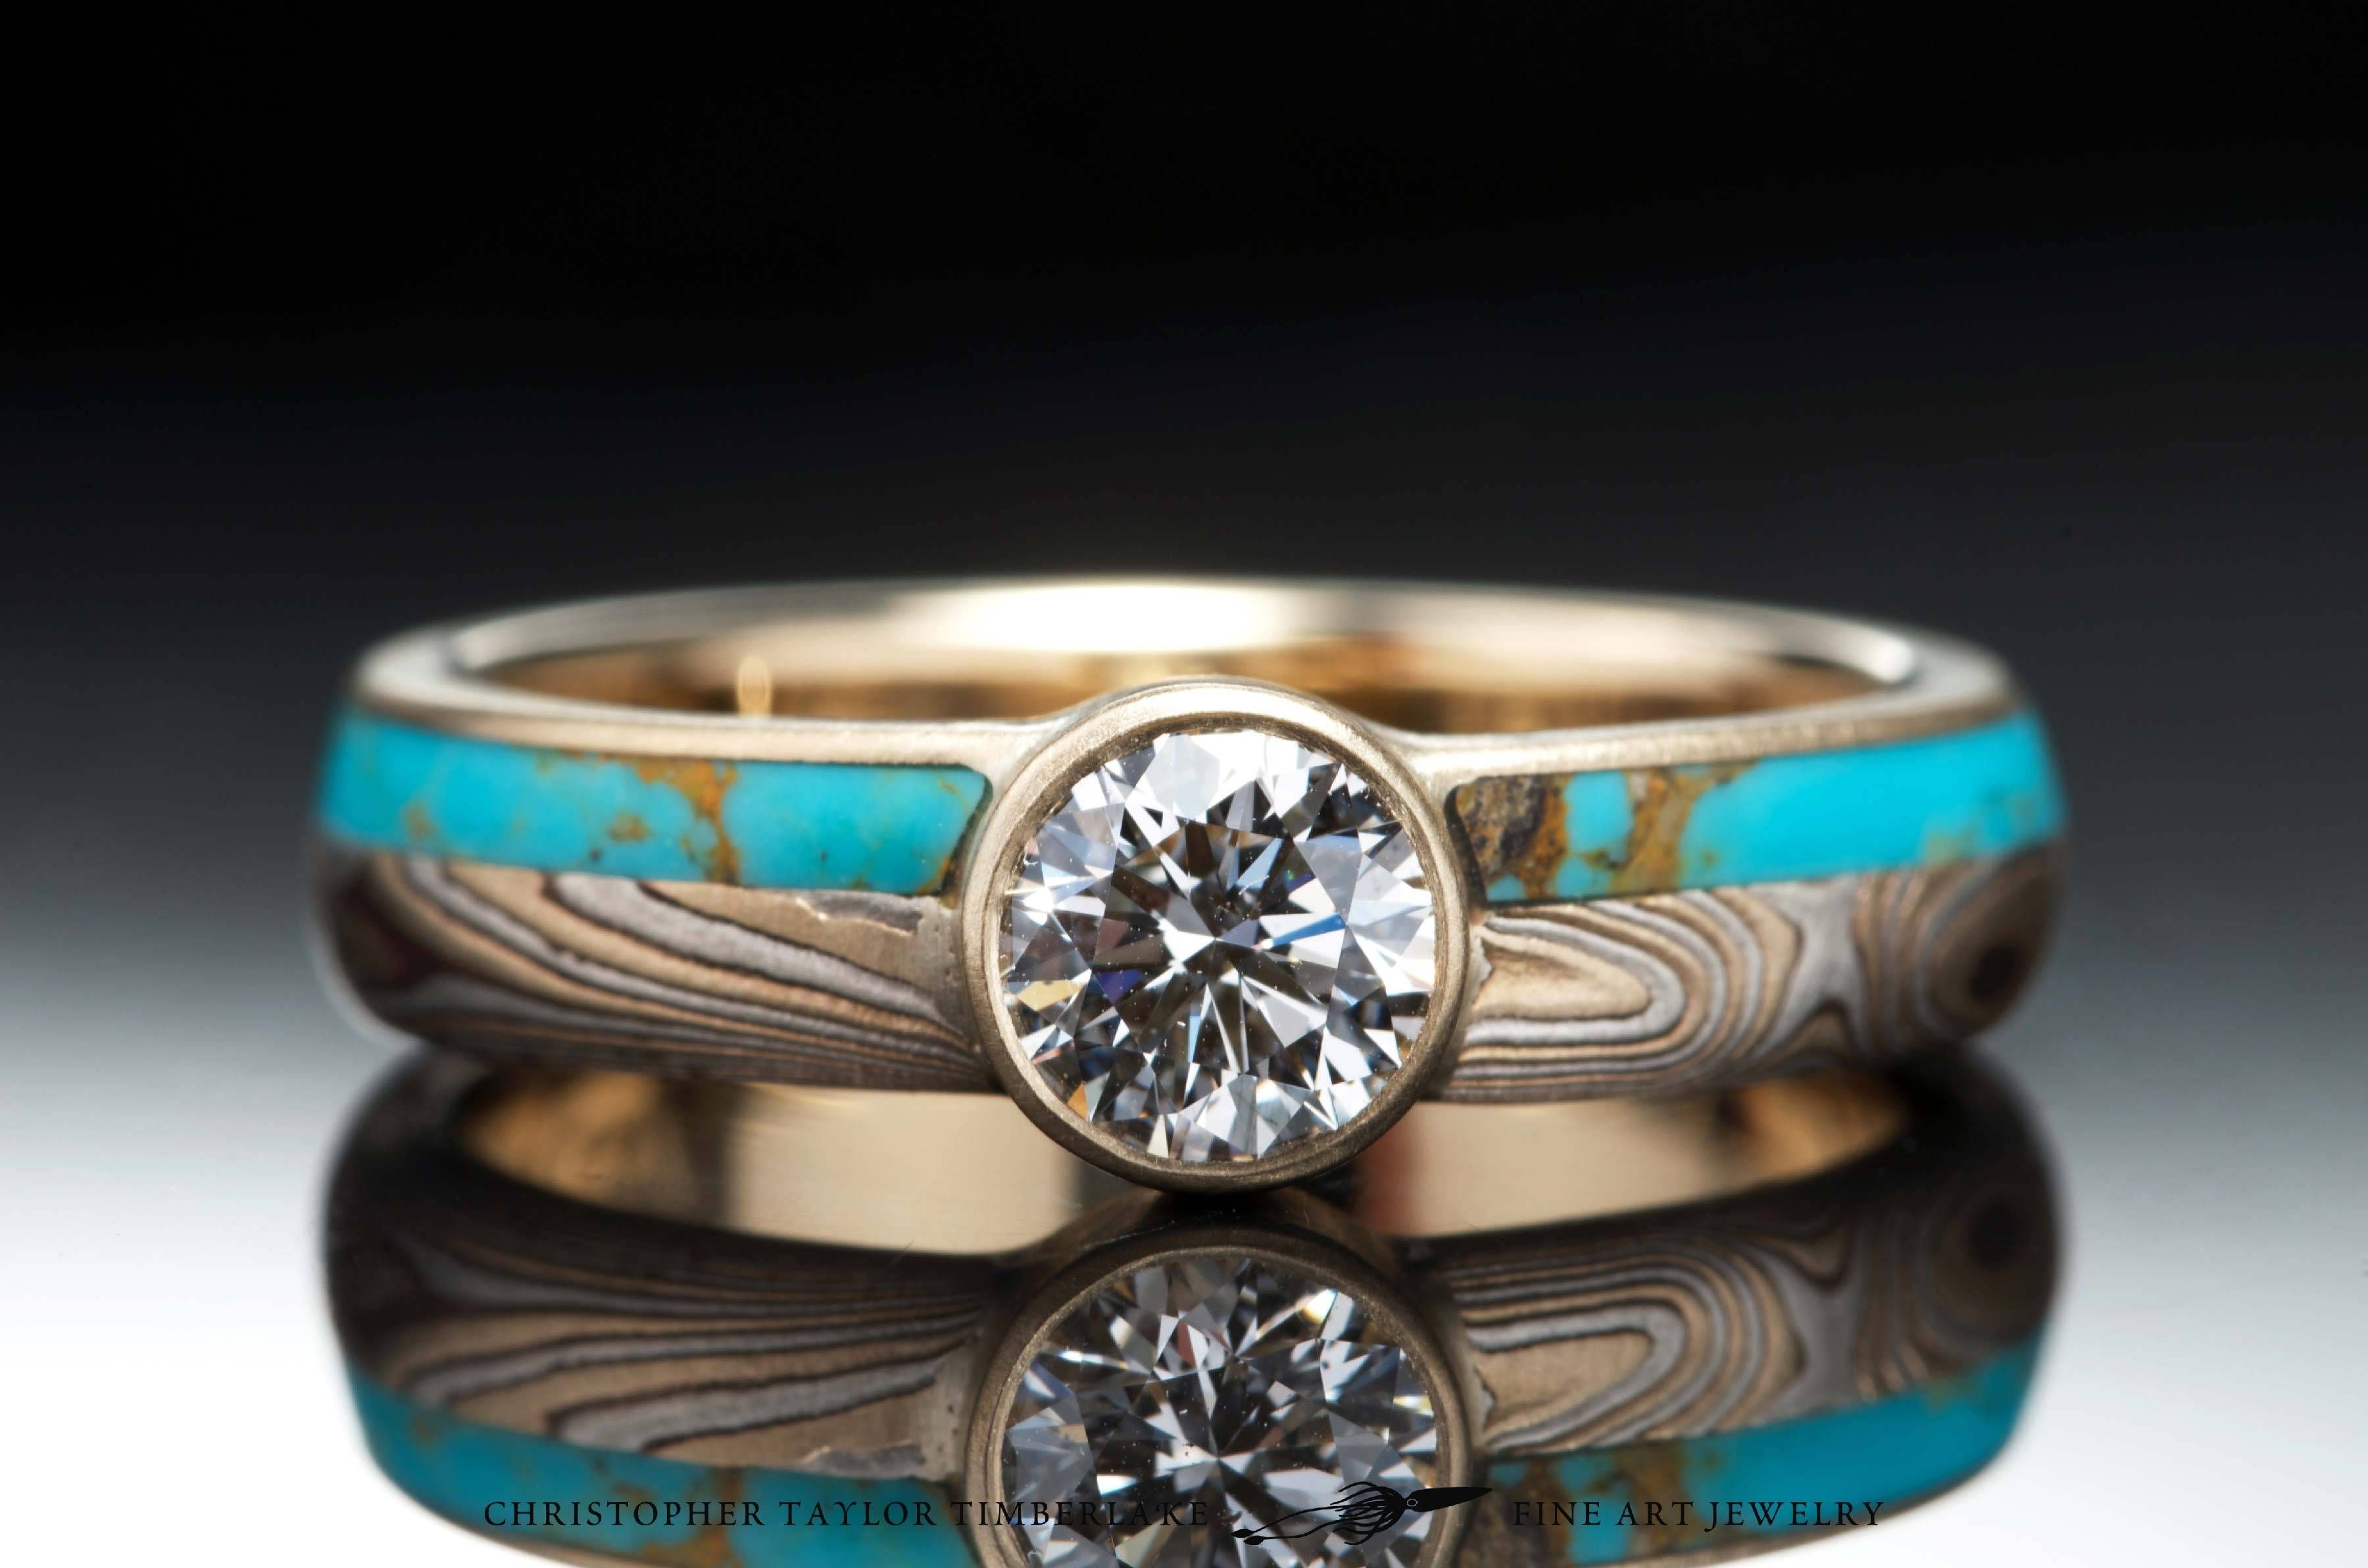 Mokumé Gane 14k Yellow Gold, Shakudo, And Sterling Silver Ring Intended For Wood Inlay Wedding Rings (View 14 of 15)